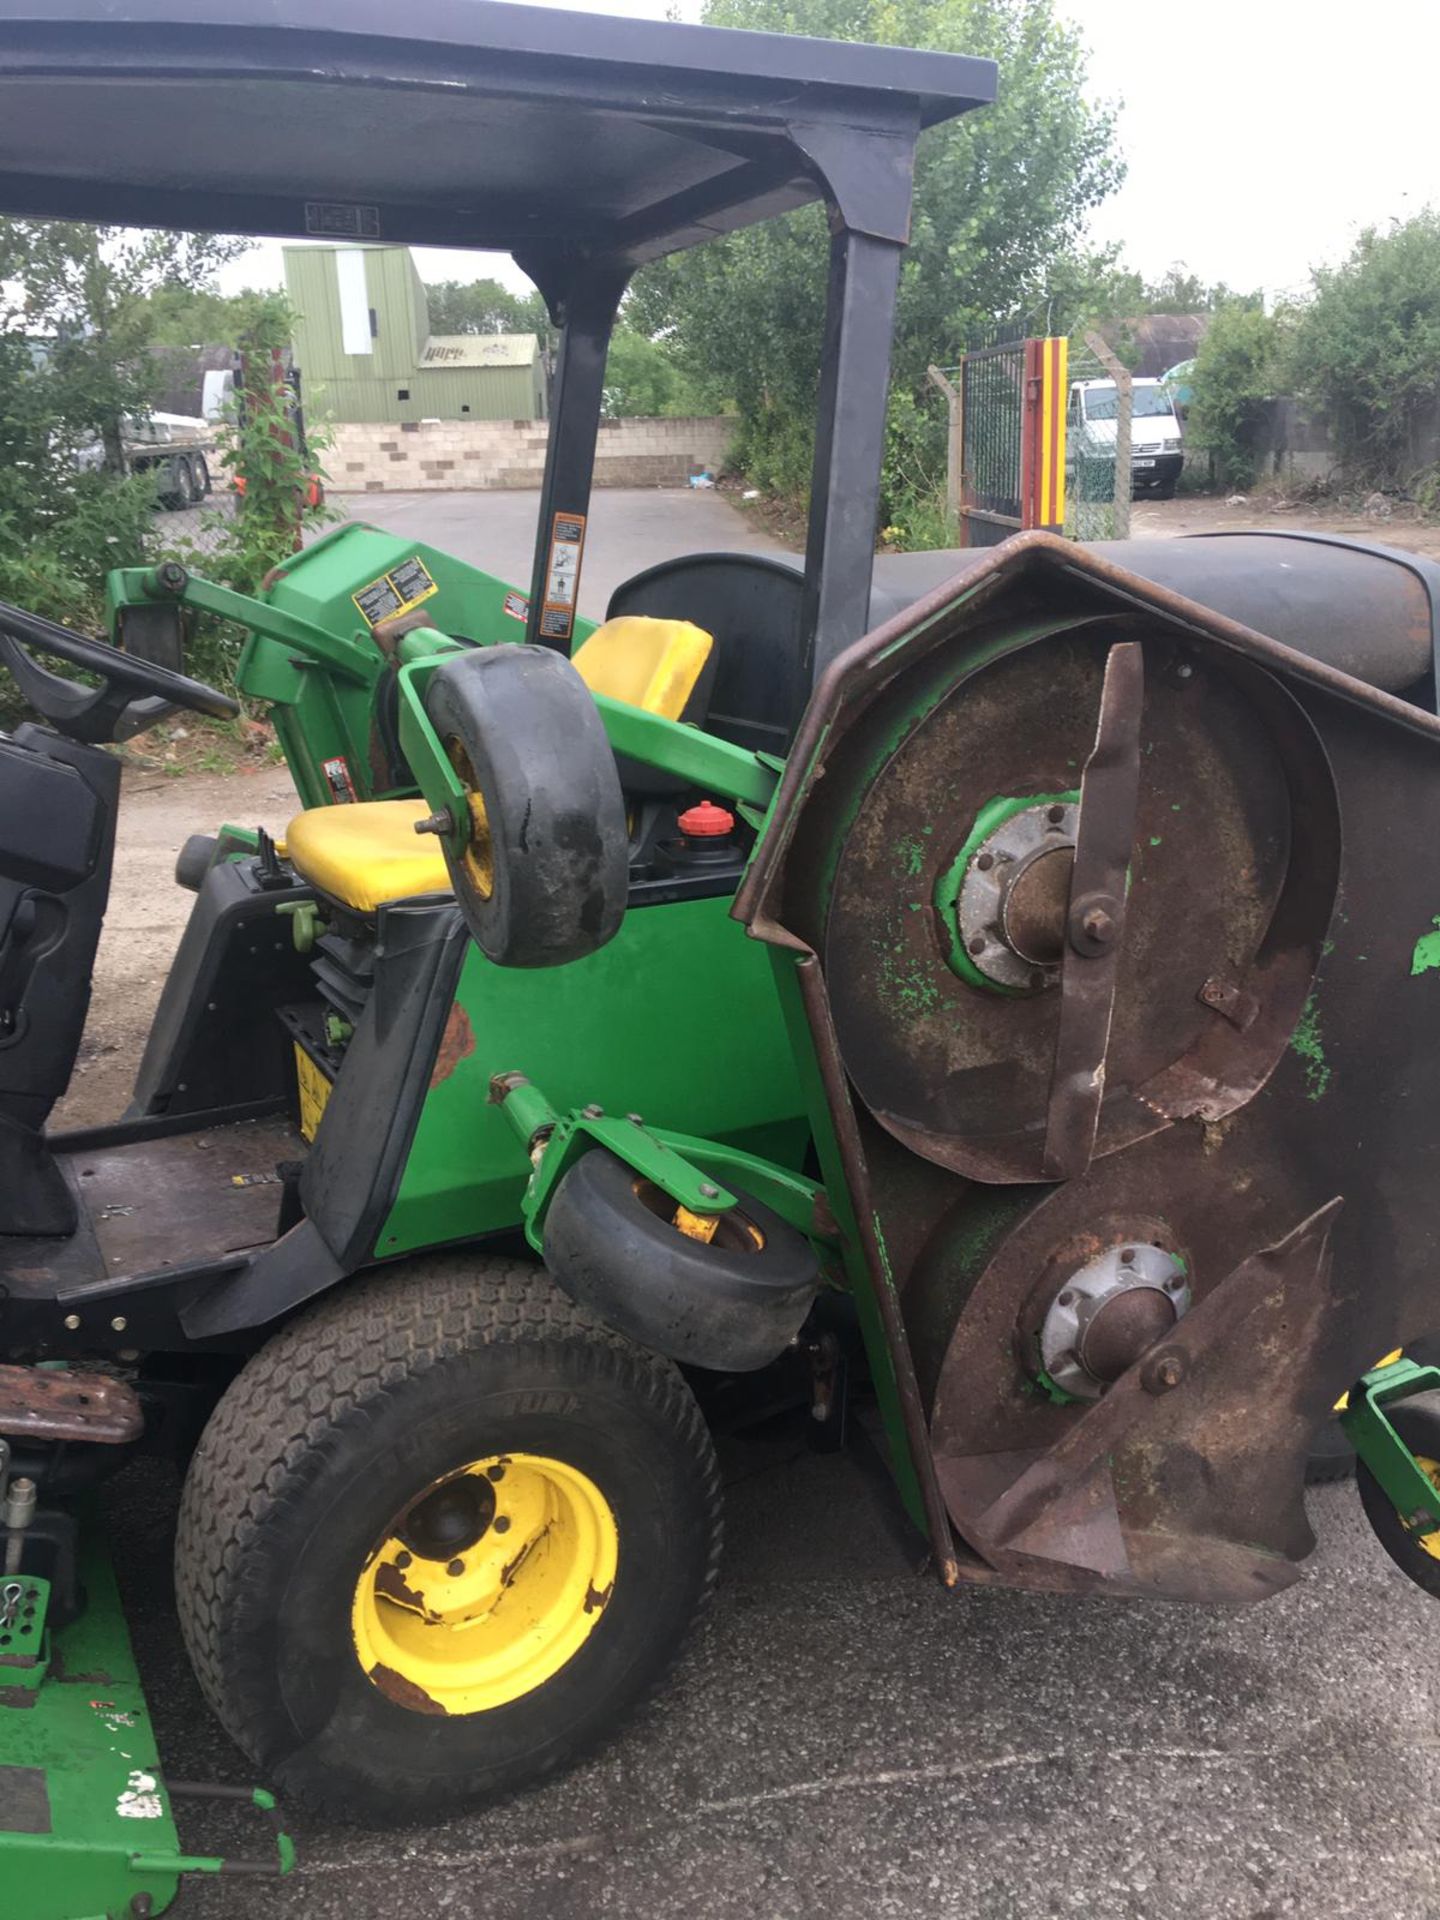 JOHN DEERE 1600 WIDE AREA TURBO BATWING RIDE ON LAWN MOWER, CRUISE CONTROL, RUNS & WORKS *NO VAT* - Image 11 of 24